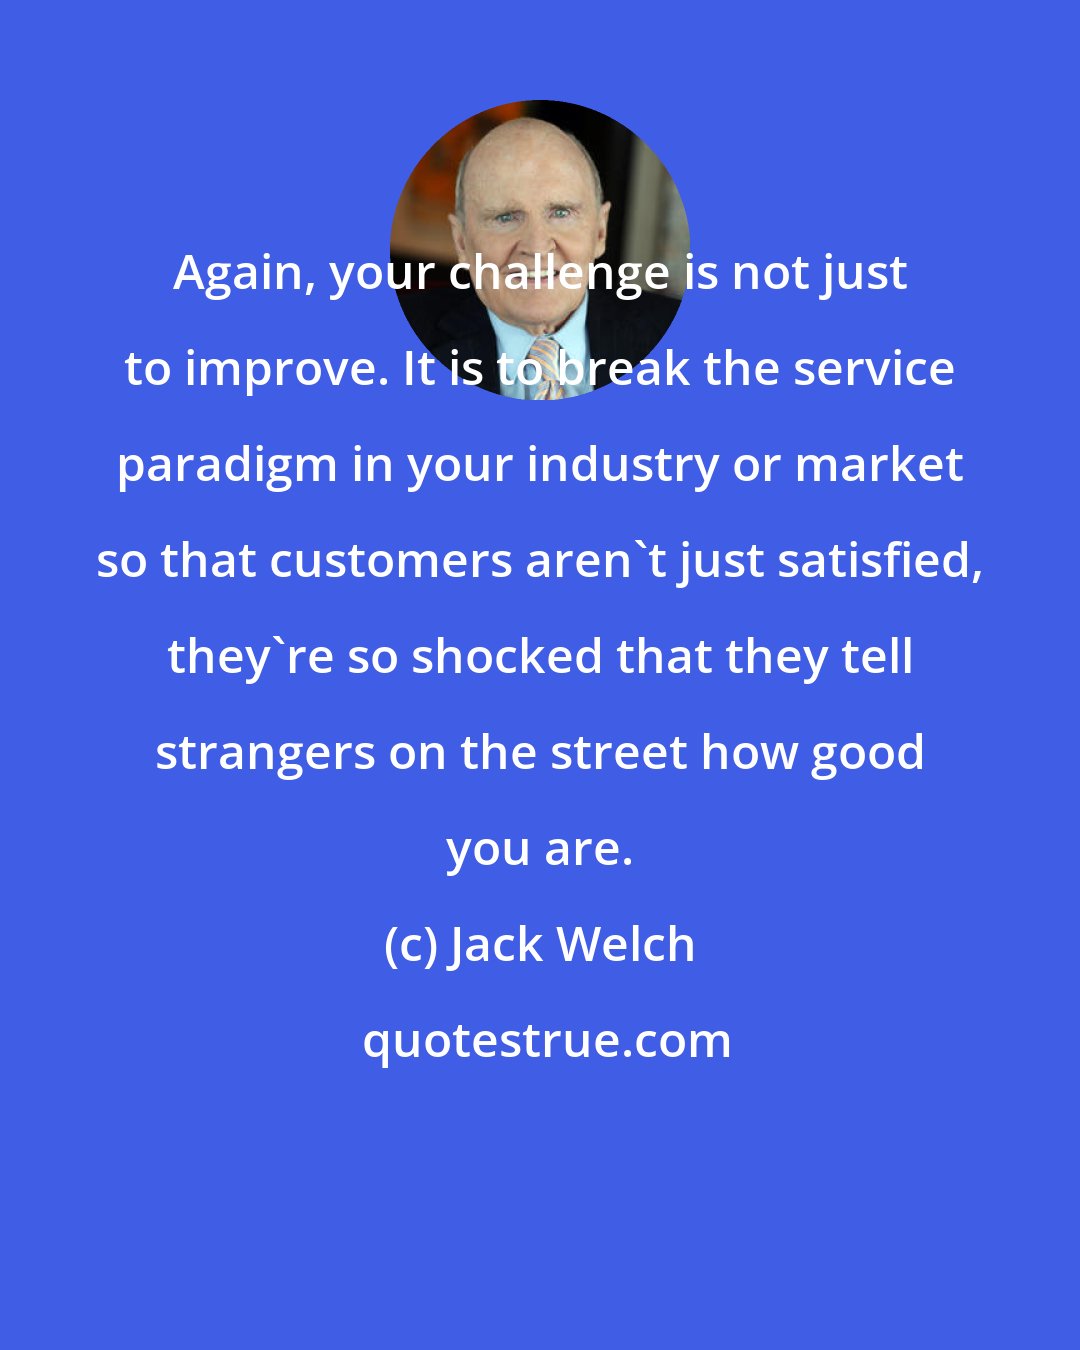 Jack Welch: Again, your challenge is not just to improve. It is to break the service paradigm in your industry or market so that customers aren't just satisfied, they're so shocked that they tell strangers on the street how good you are.